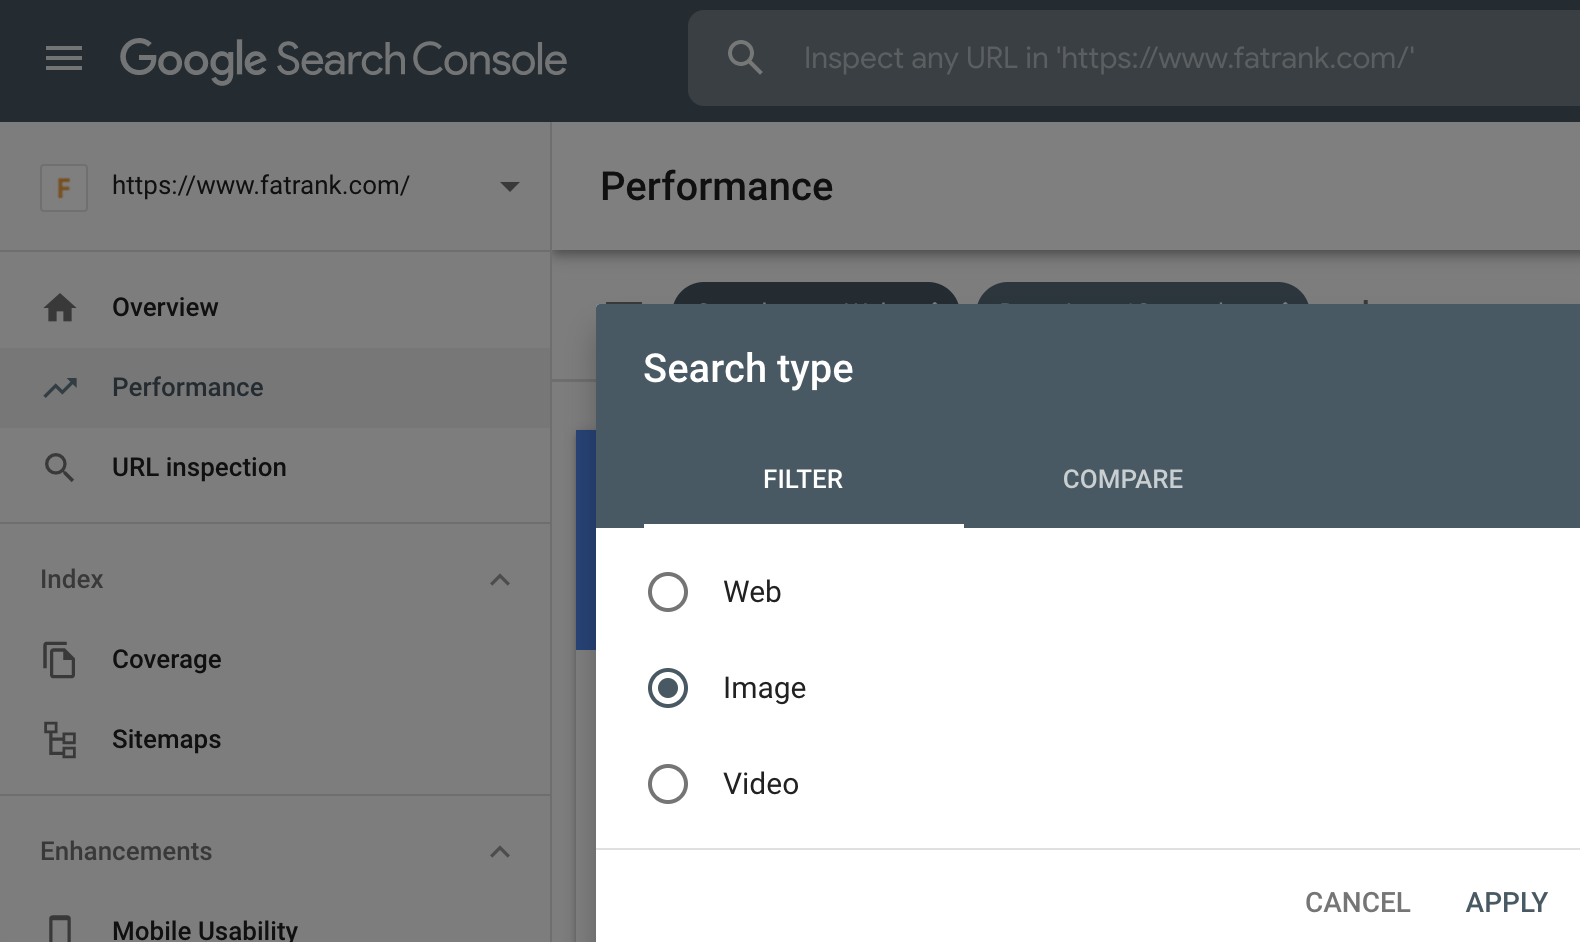 Image Filter On Google Search Console